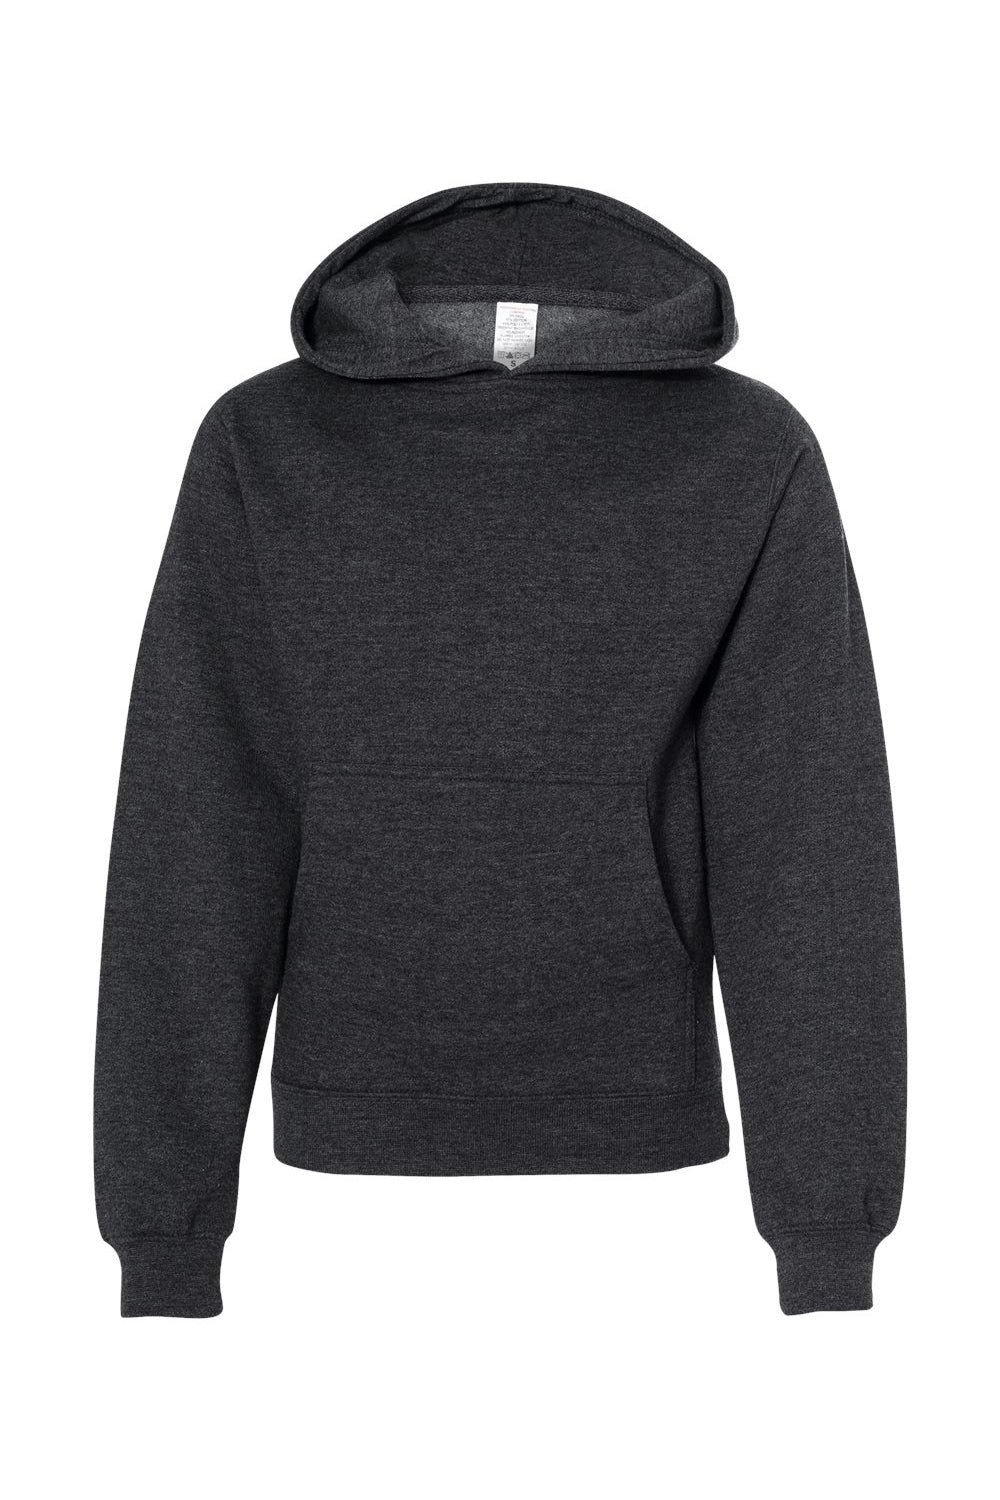 Independent Trading Co. SS4001Y Youth Hooded Sweatshirt Hoodie Heather Charcoal Grey Flat Front